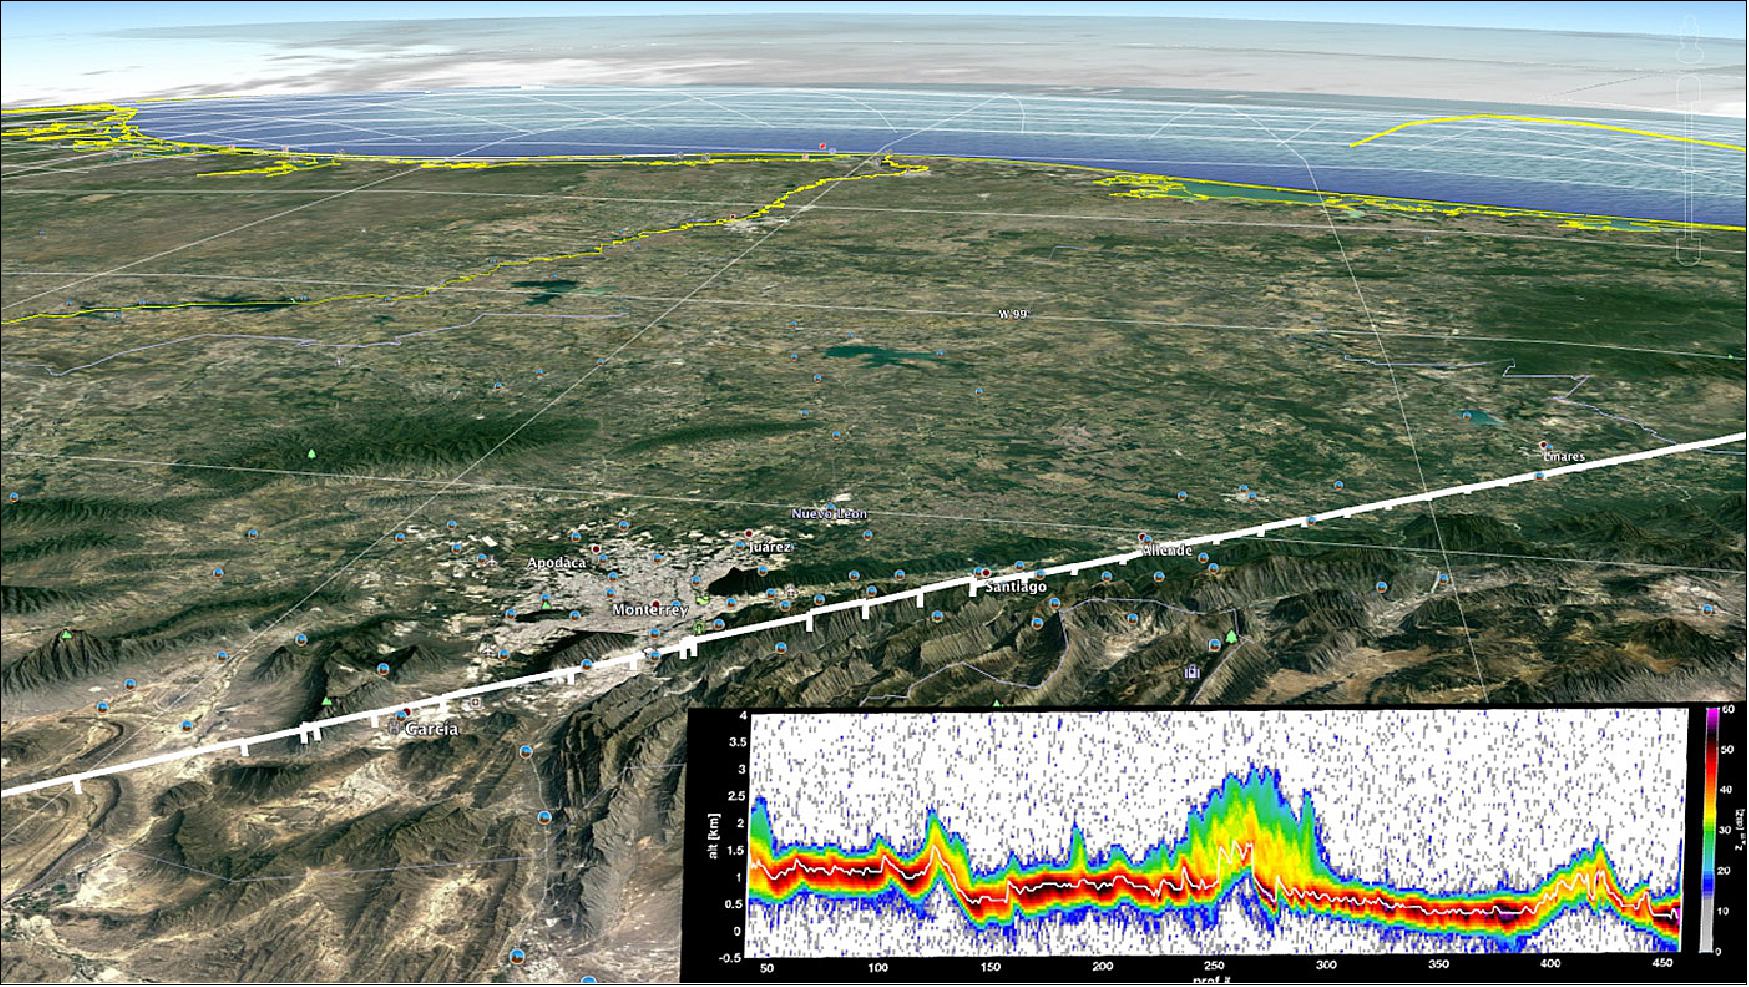 Figure 19: A photo from Google Earth of the mountainous area over Mexico where RainCube measured its first storm. The white line shows RainCube's flight path. The colorful graph in the bottom right shows the amount of rain produced by the storm, as seen by RainCube's radar (image credit: NASA/JPL-Caltech/Google)